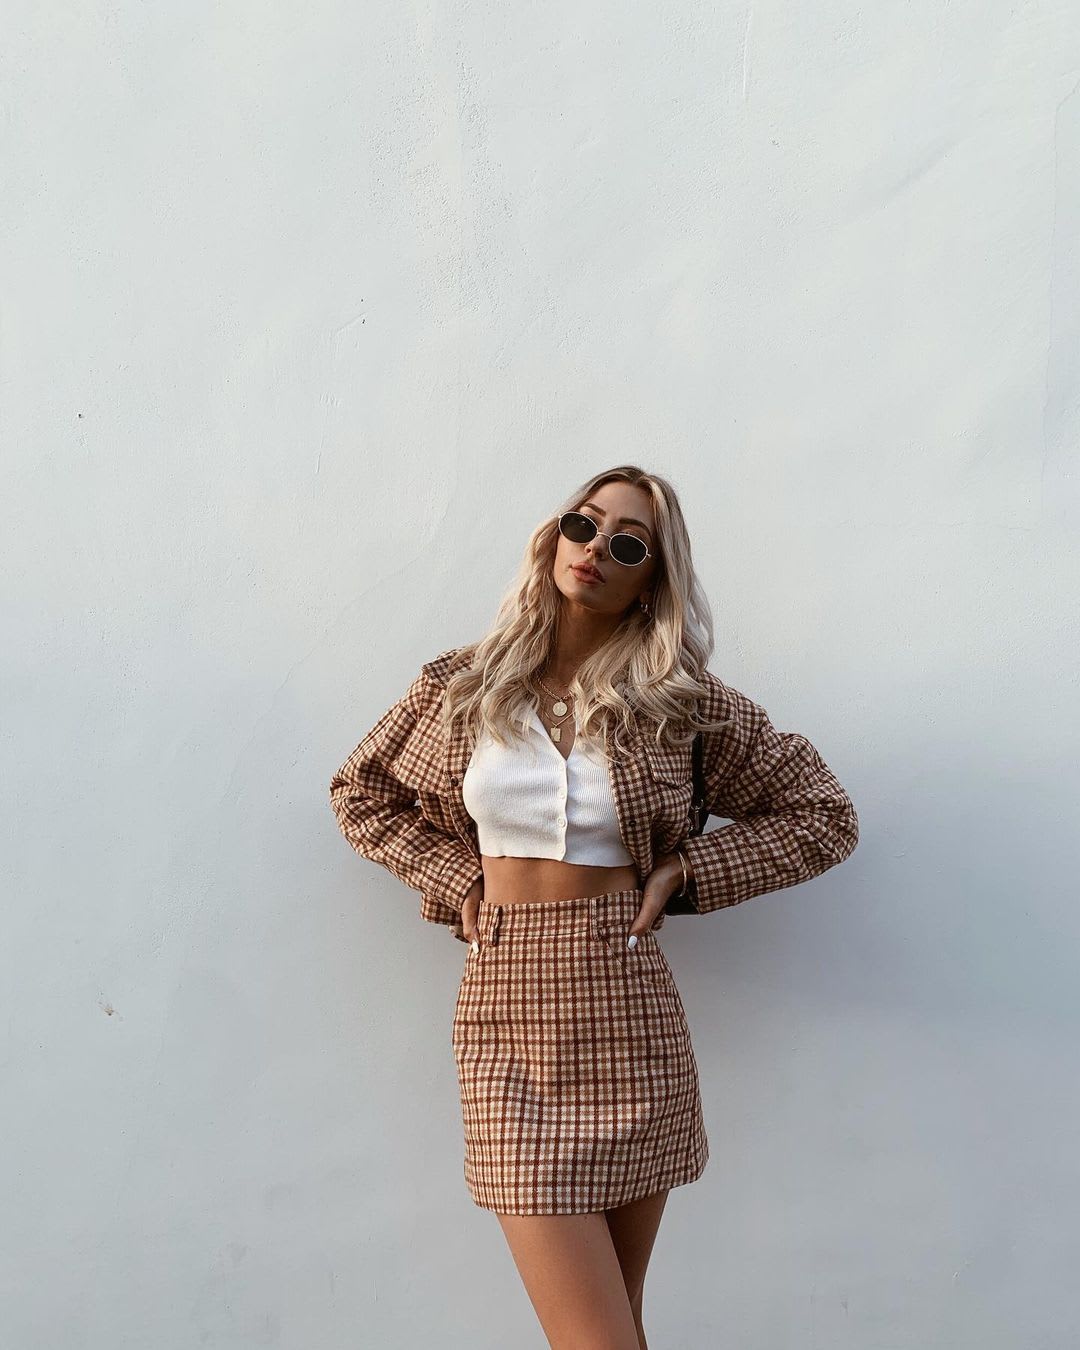 12 Plaid Skirt Outfits We're Trying Out This Season - Lulus.com Fashion Blog